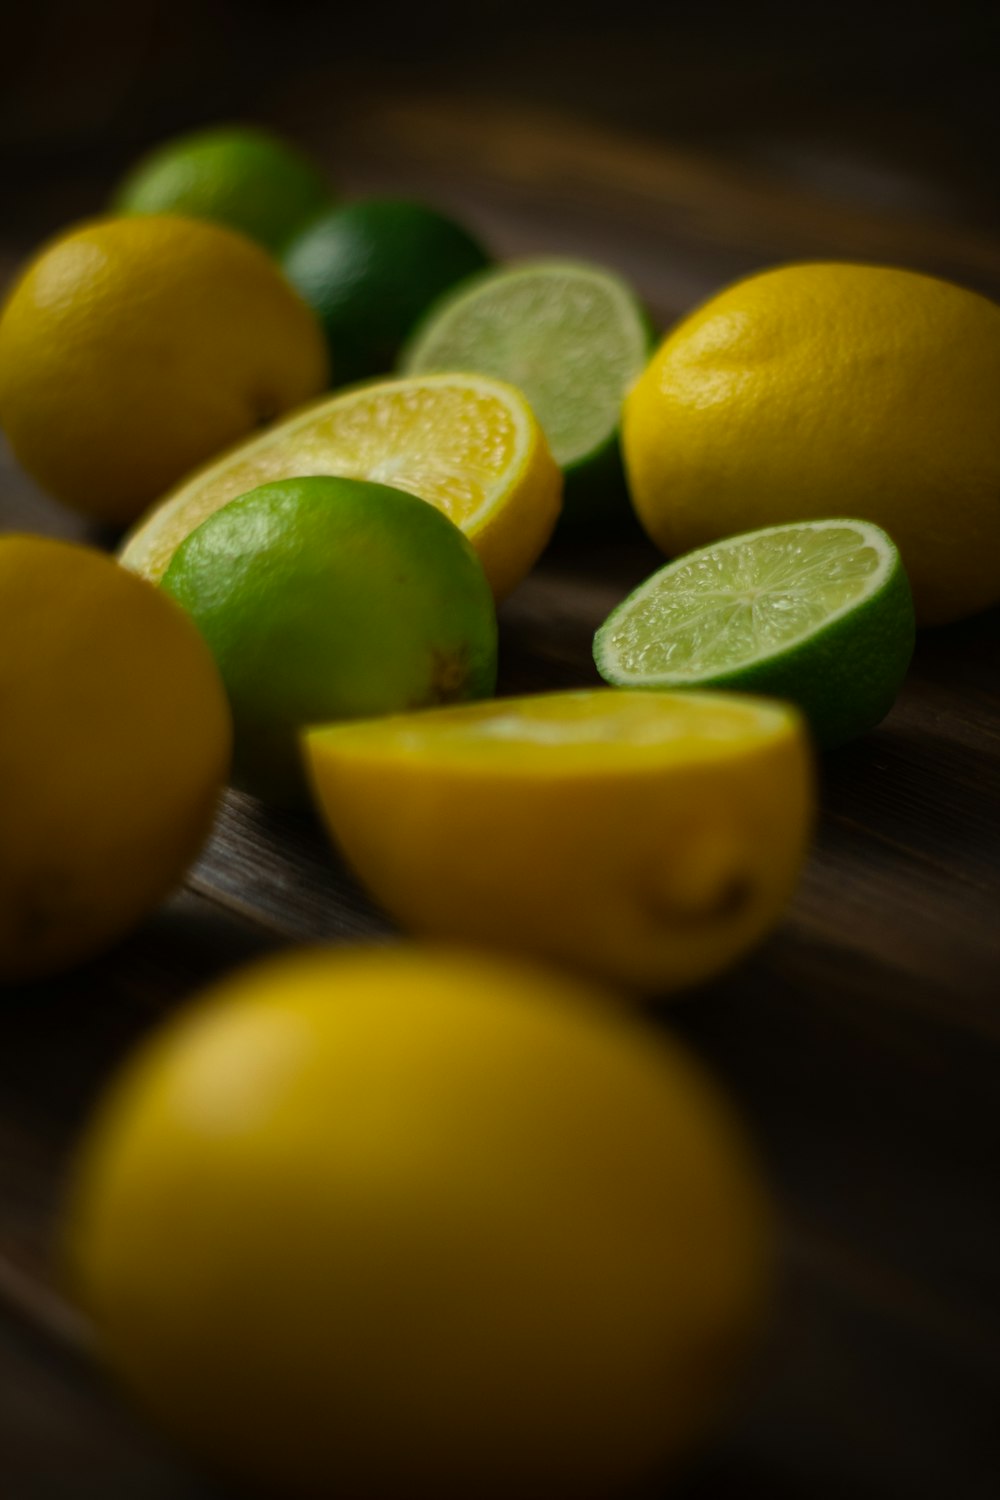 a group of lemons and limes on a table